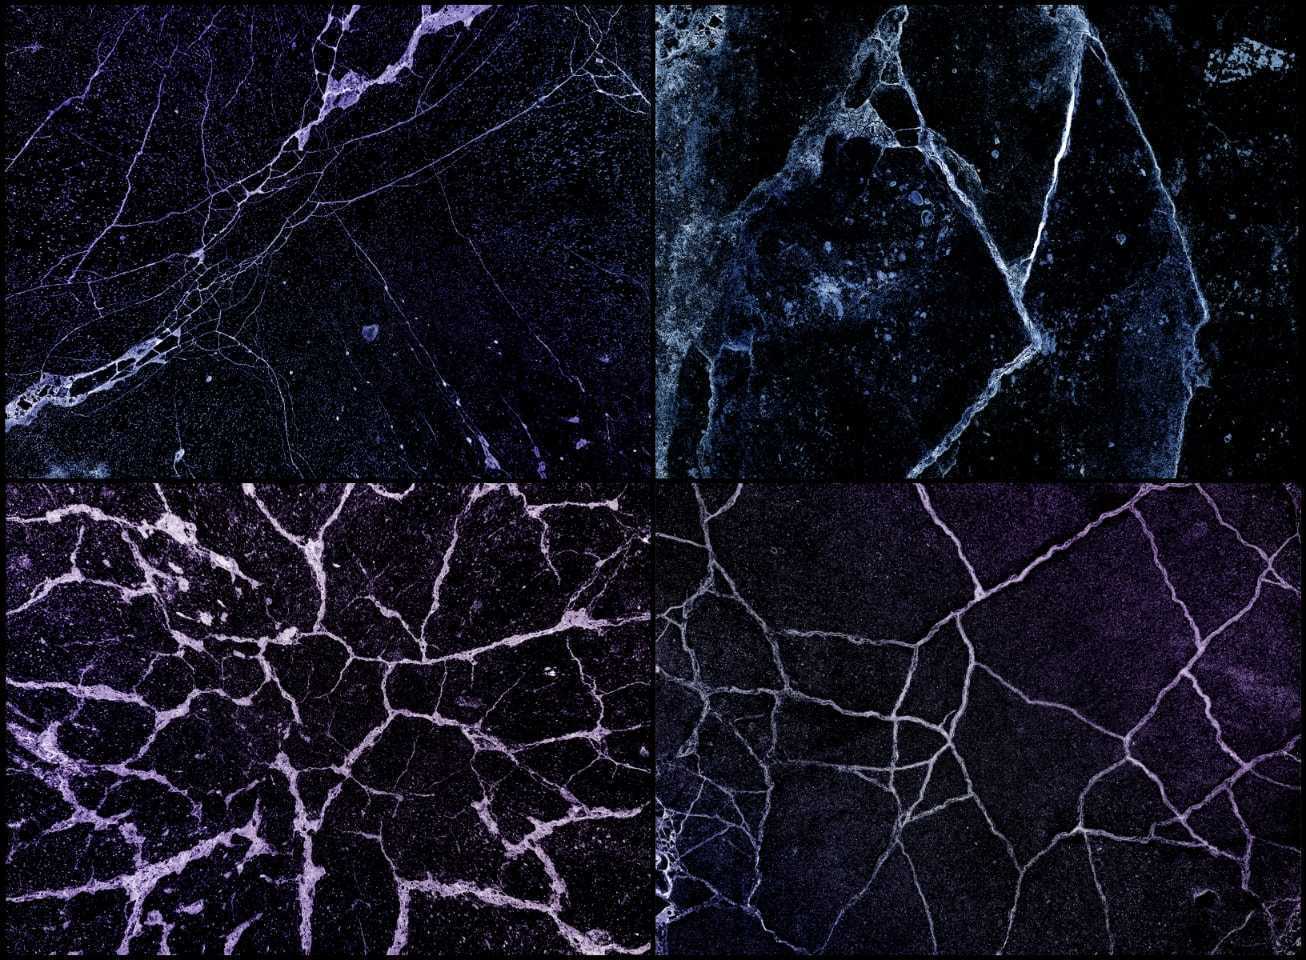 Backgrounds in a marble style.